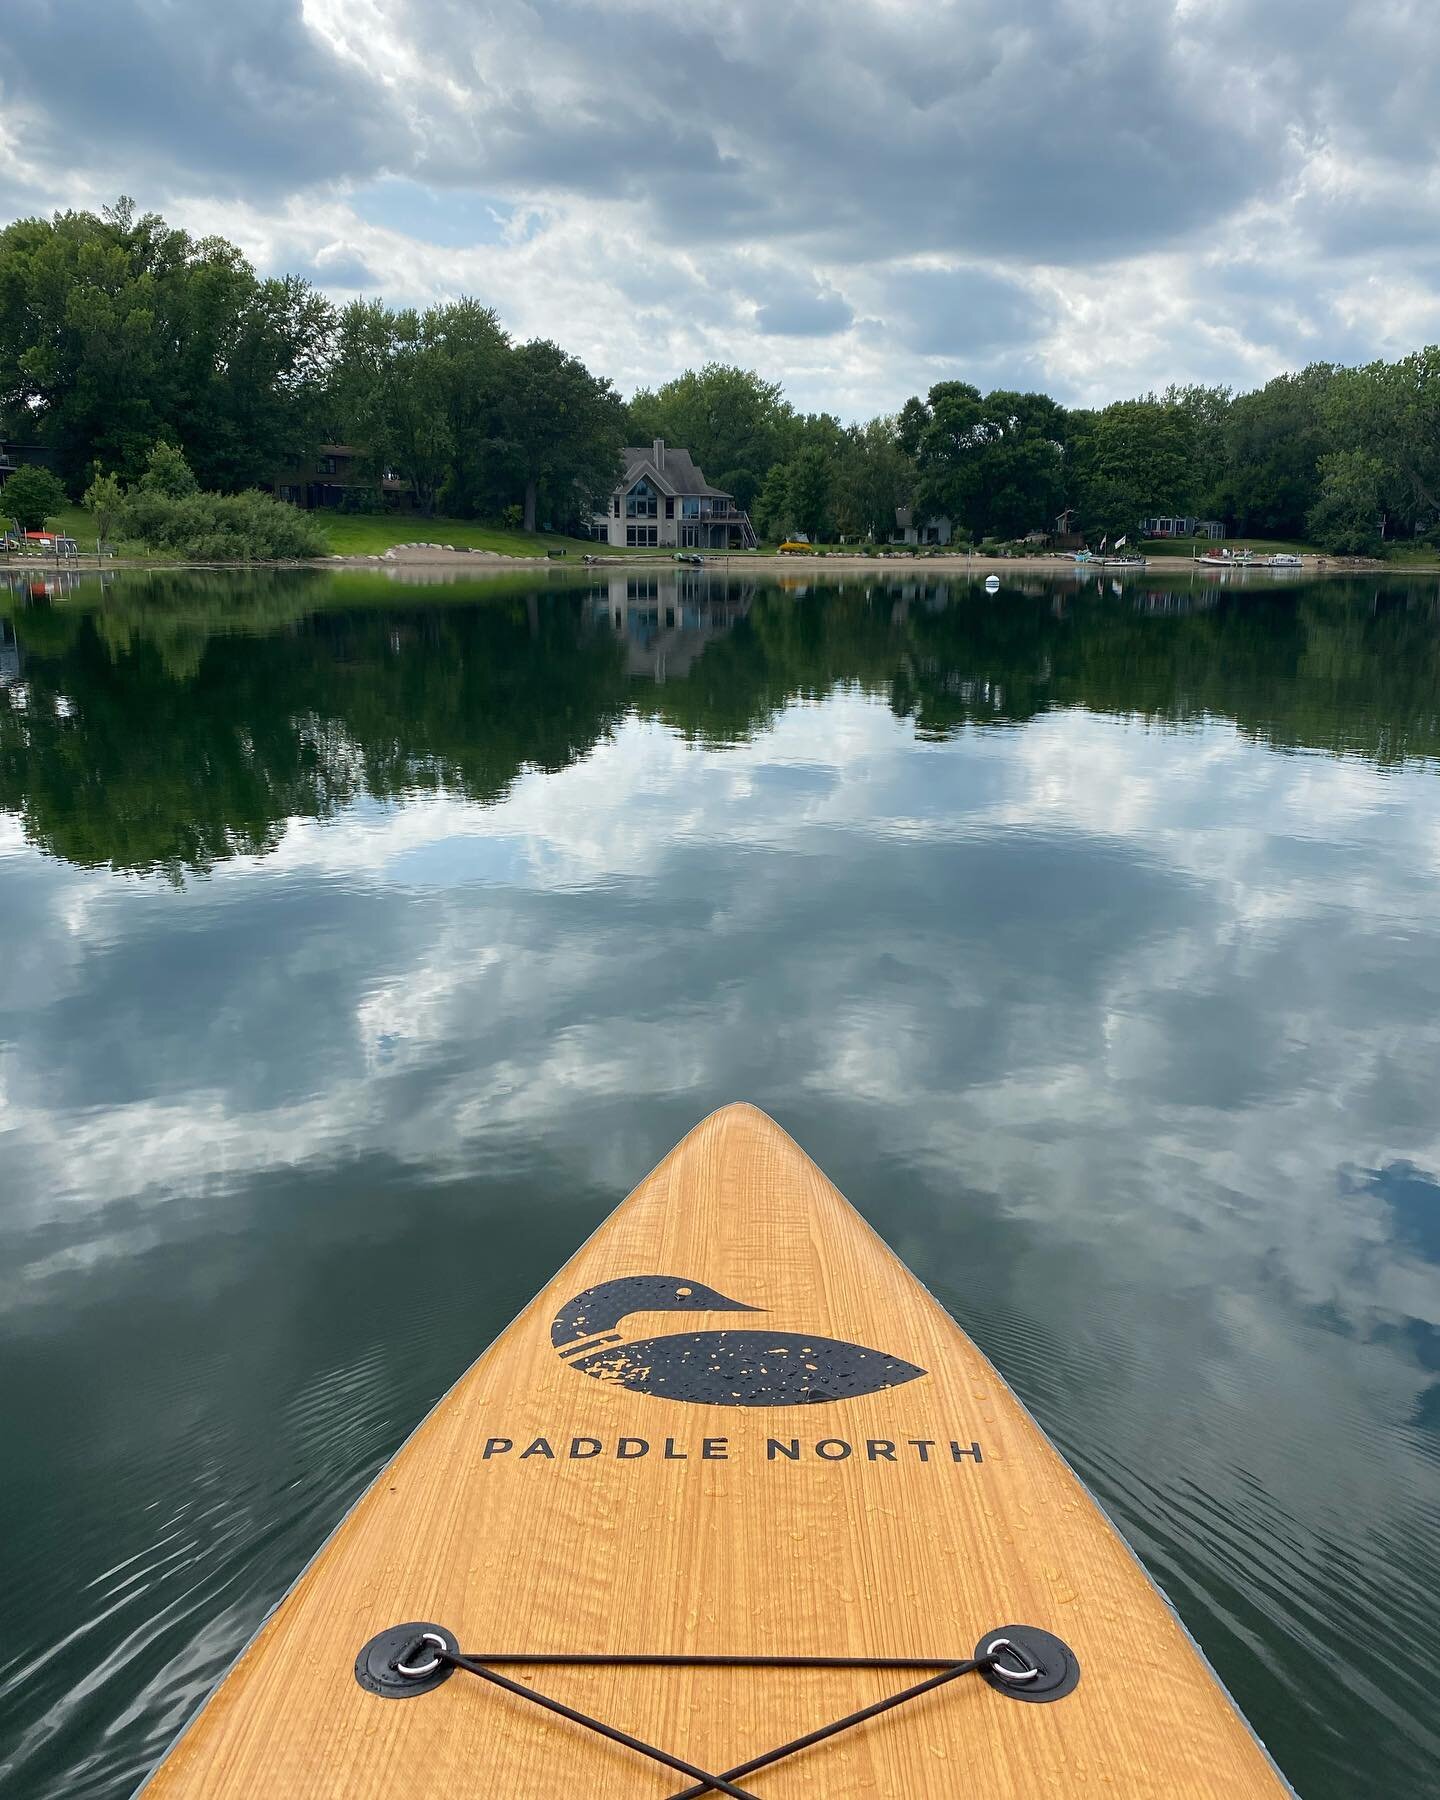 The water is like glass today and there is a quiet peace on Shady Oak Lake.  As if it knows the end of summer is near. 

#paddleboarding
#mnlakes
#afternoonmeditation